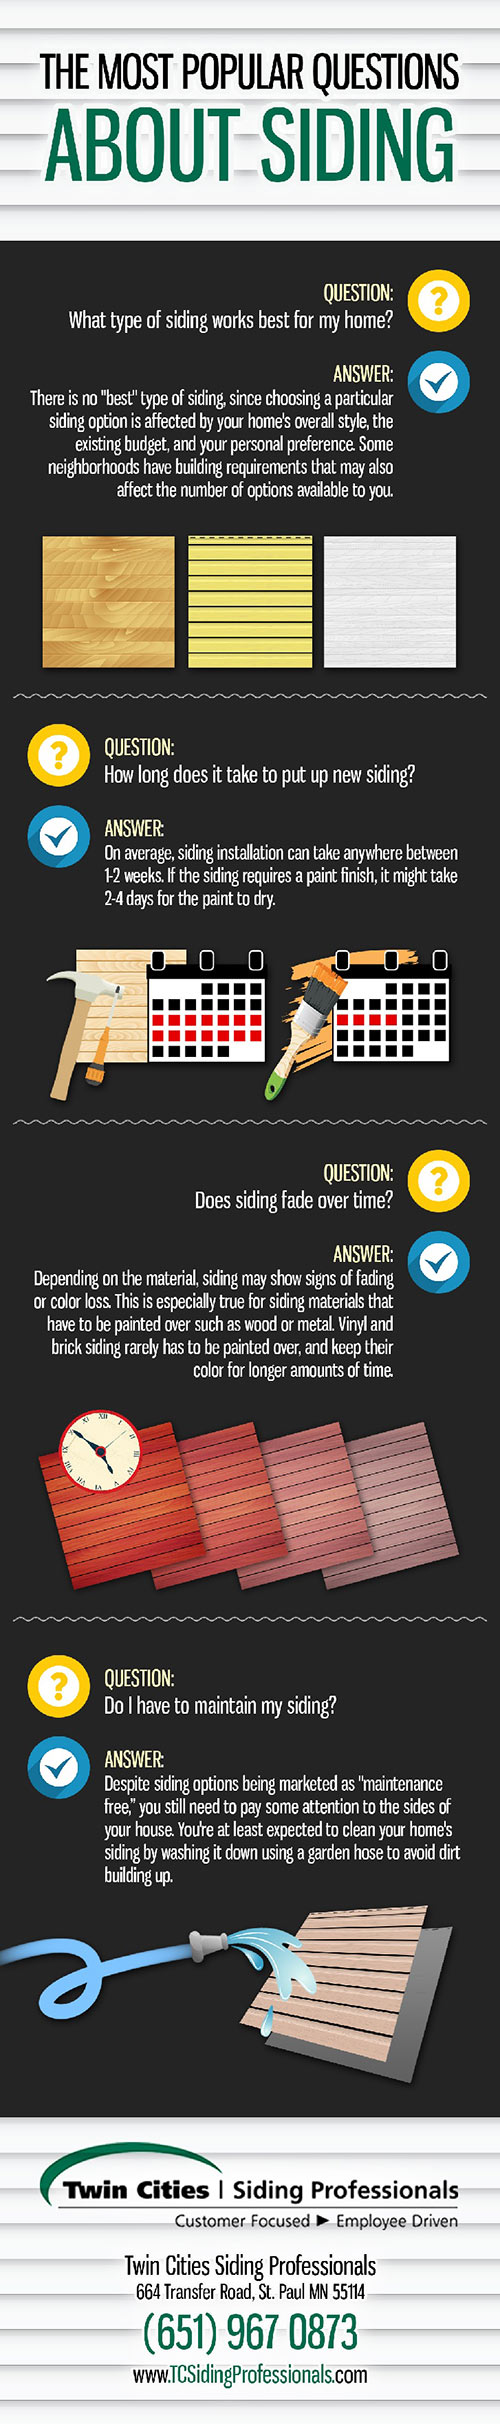 The Most Popular Questions About Siding